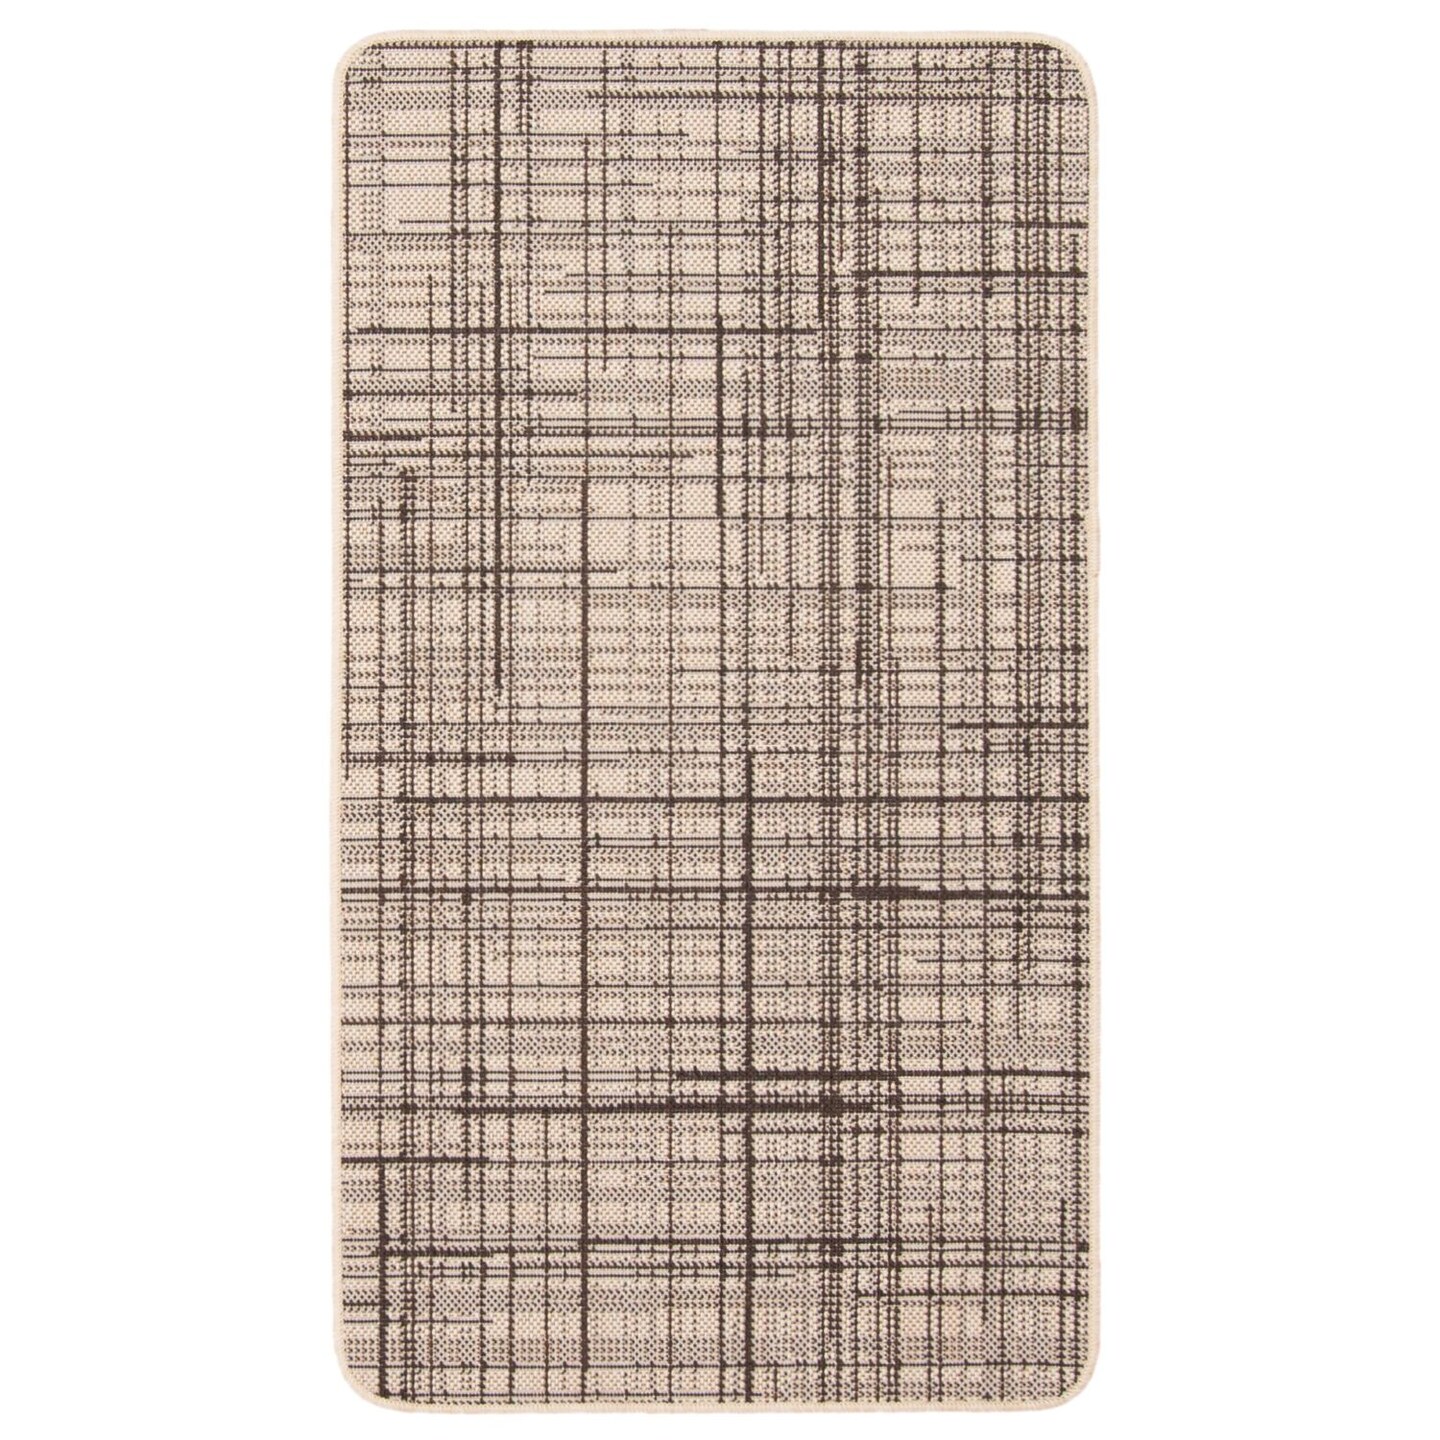 Chaudhary Living 2&#x27; x 4&#x27; Abstract Indoor Outdoor Area Throw Rug - Tan